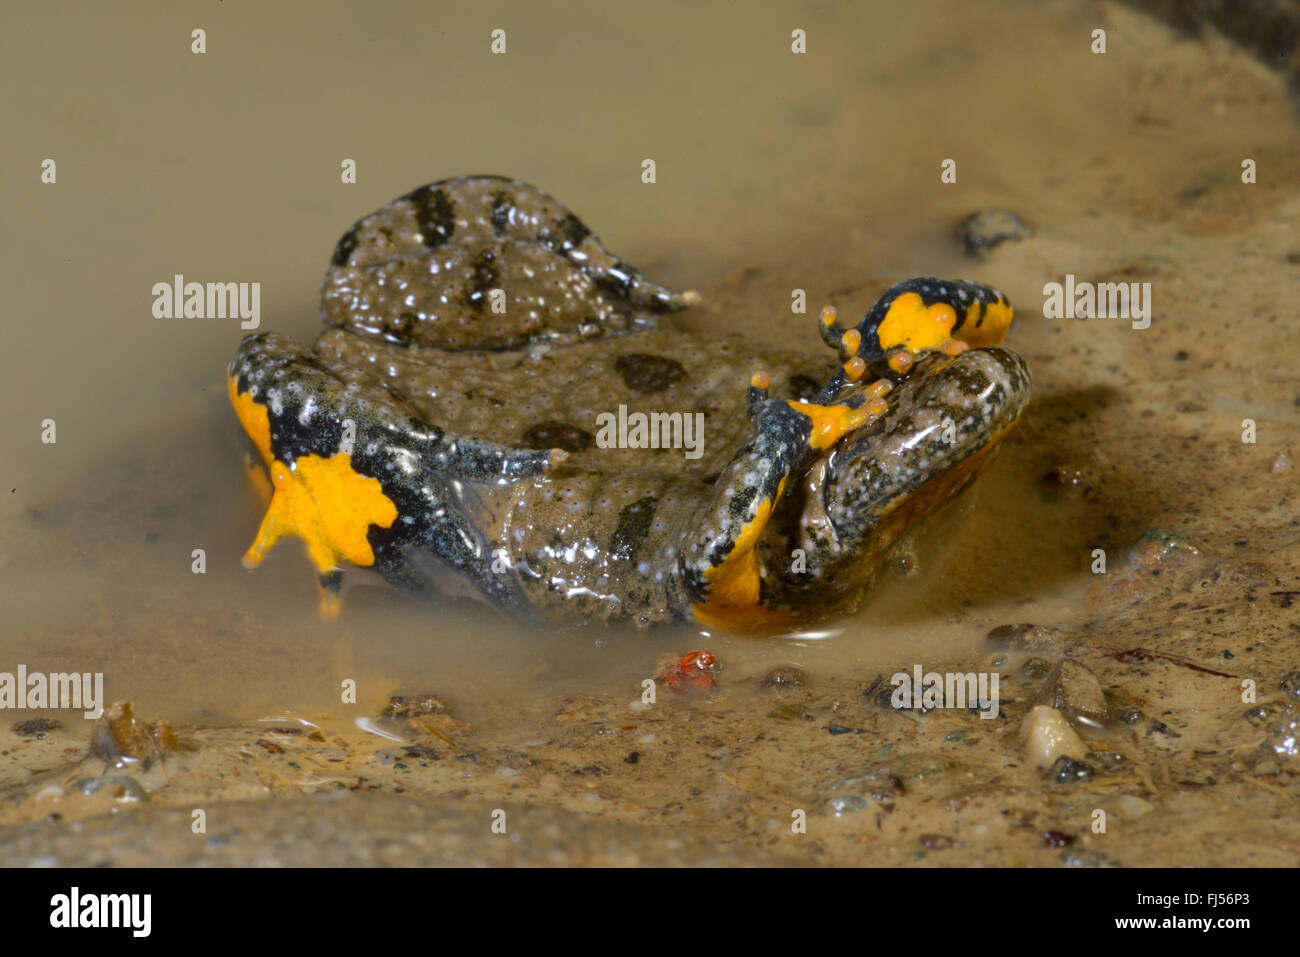 yellow-bellied toad, yellowbelly toad, variegated fire-toad (Bombina variegata), defence posture of the yellow-bellied, unken reflex, Romania Stock Photo